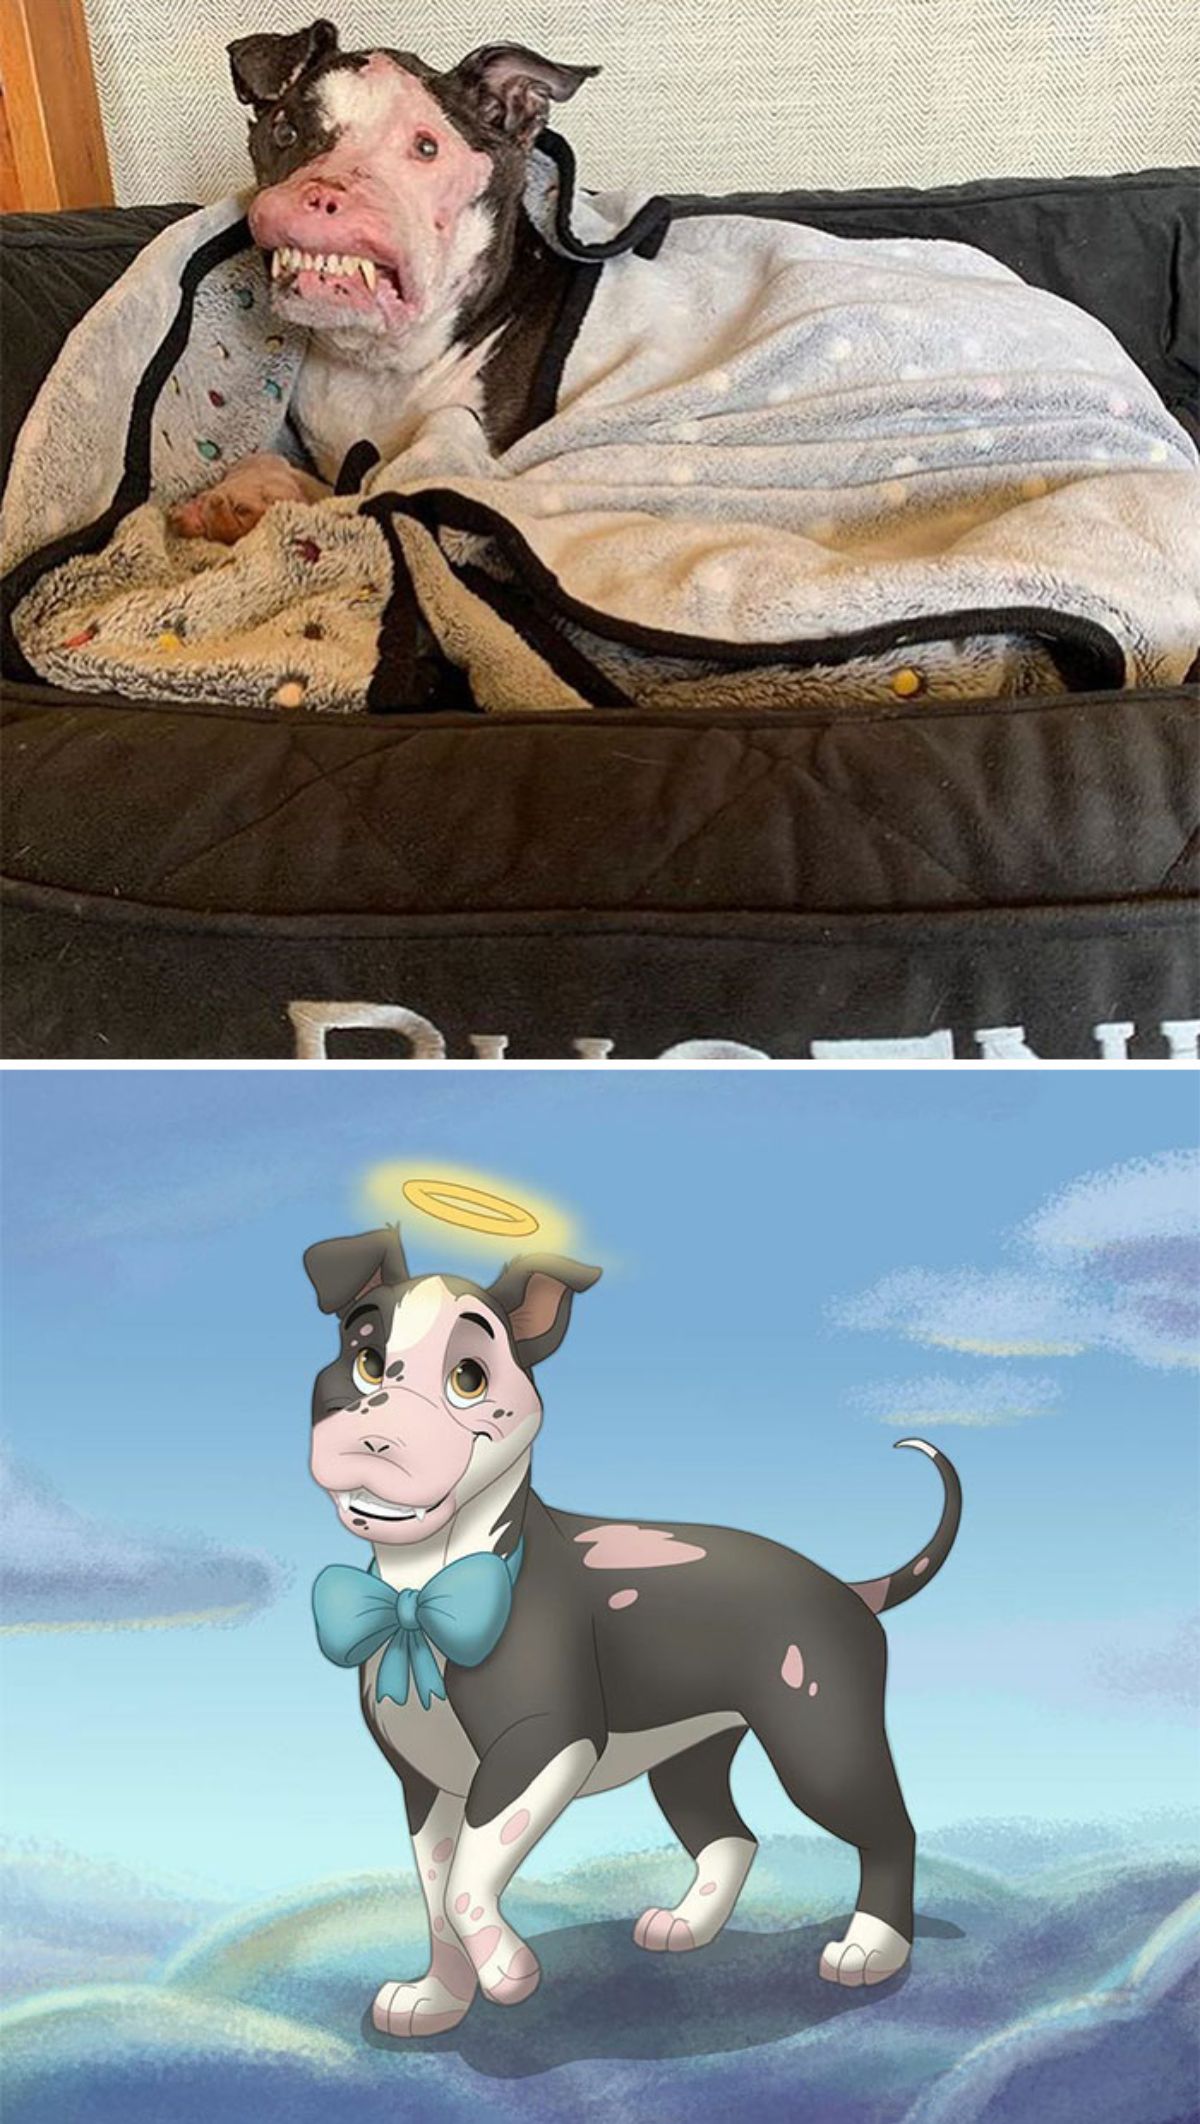 real photo and cartoon image of a black white and pink dog